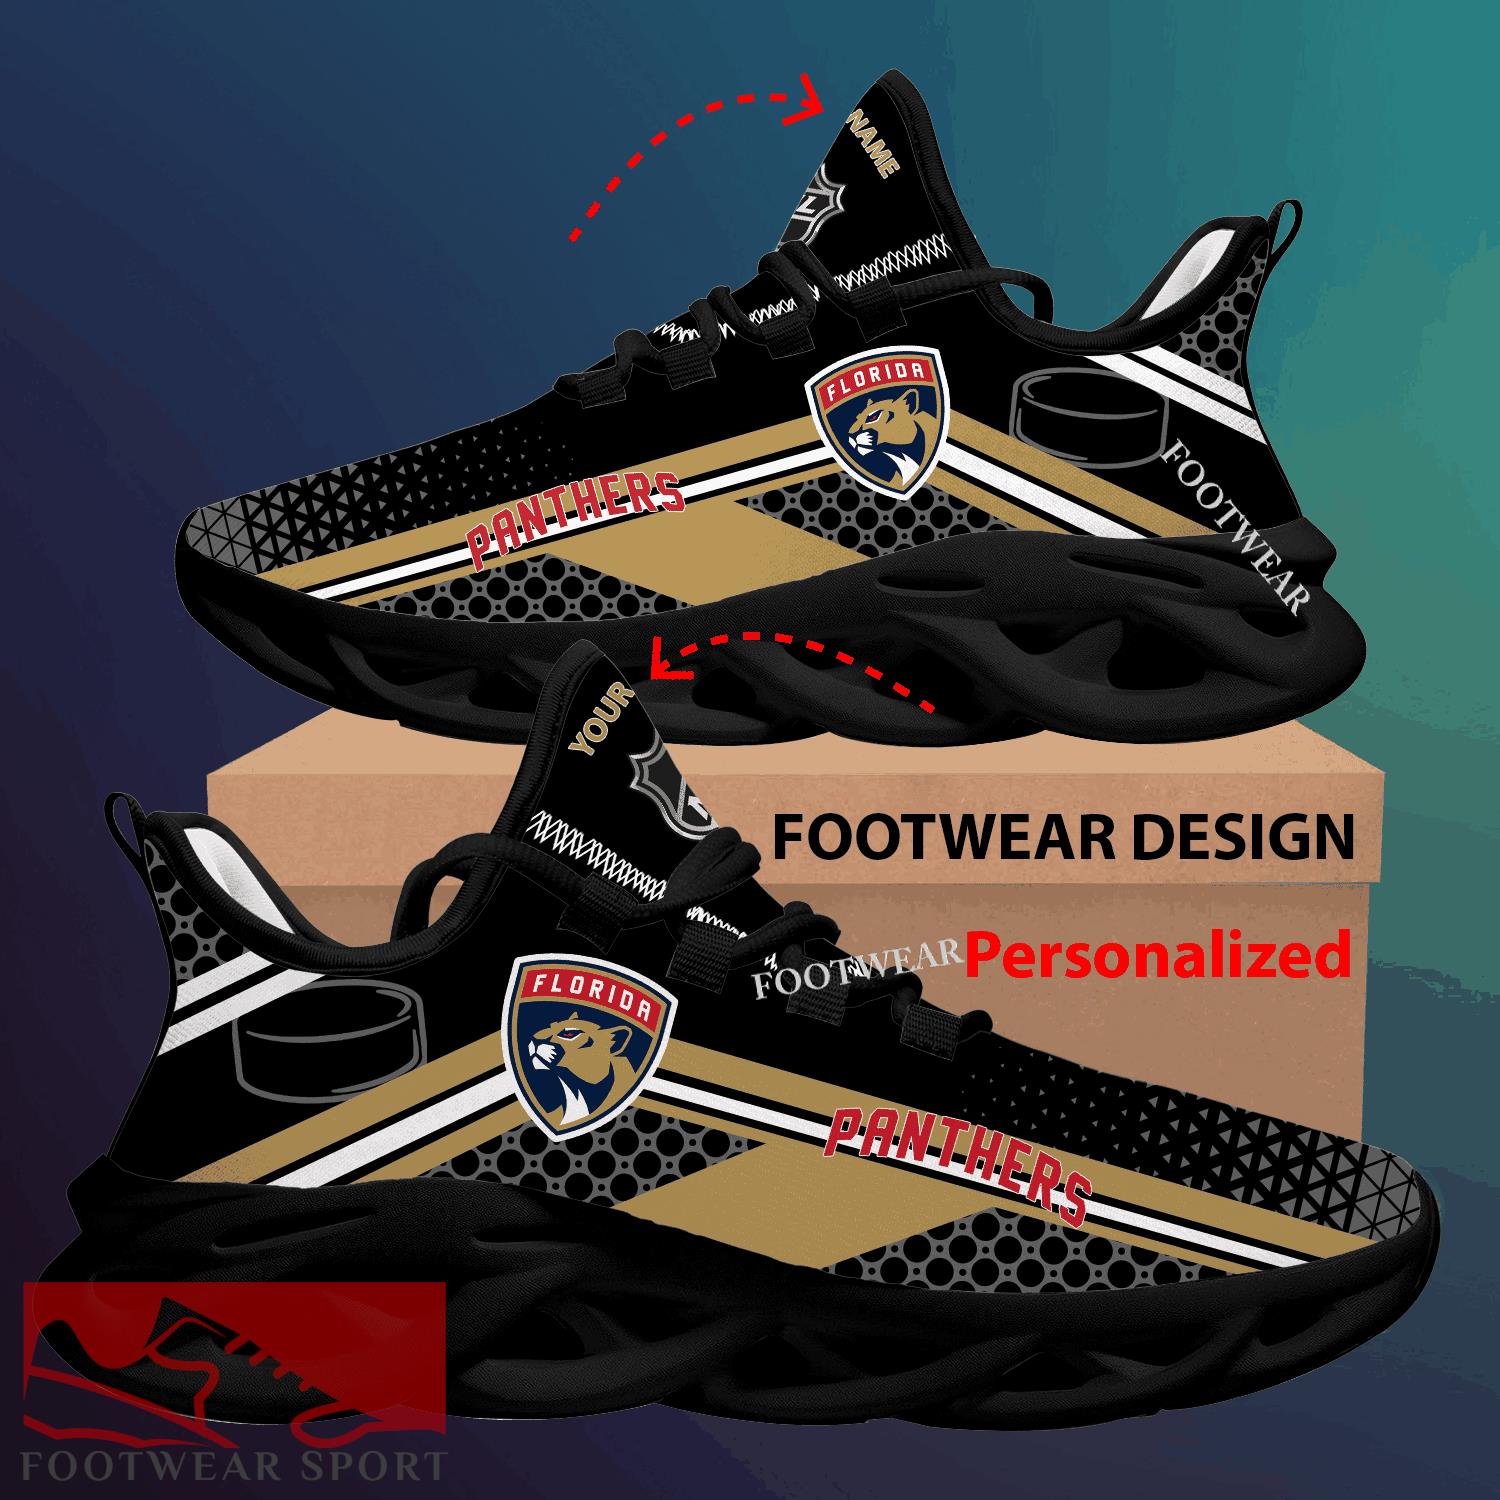 Florida Panthers Max Soul Shoes New Season Personalized For Men Women Sport Sneaker Artistry Fans - NHL Florida Panthers Max Soul Shoes New Season Personalized Photo 2